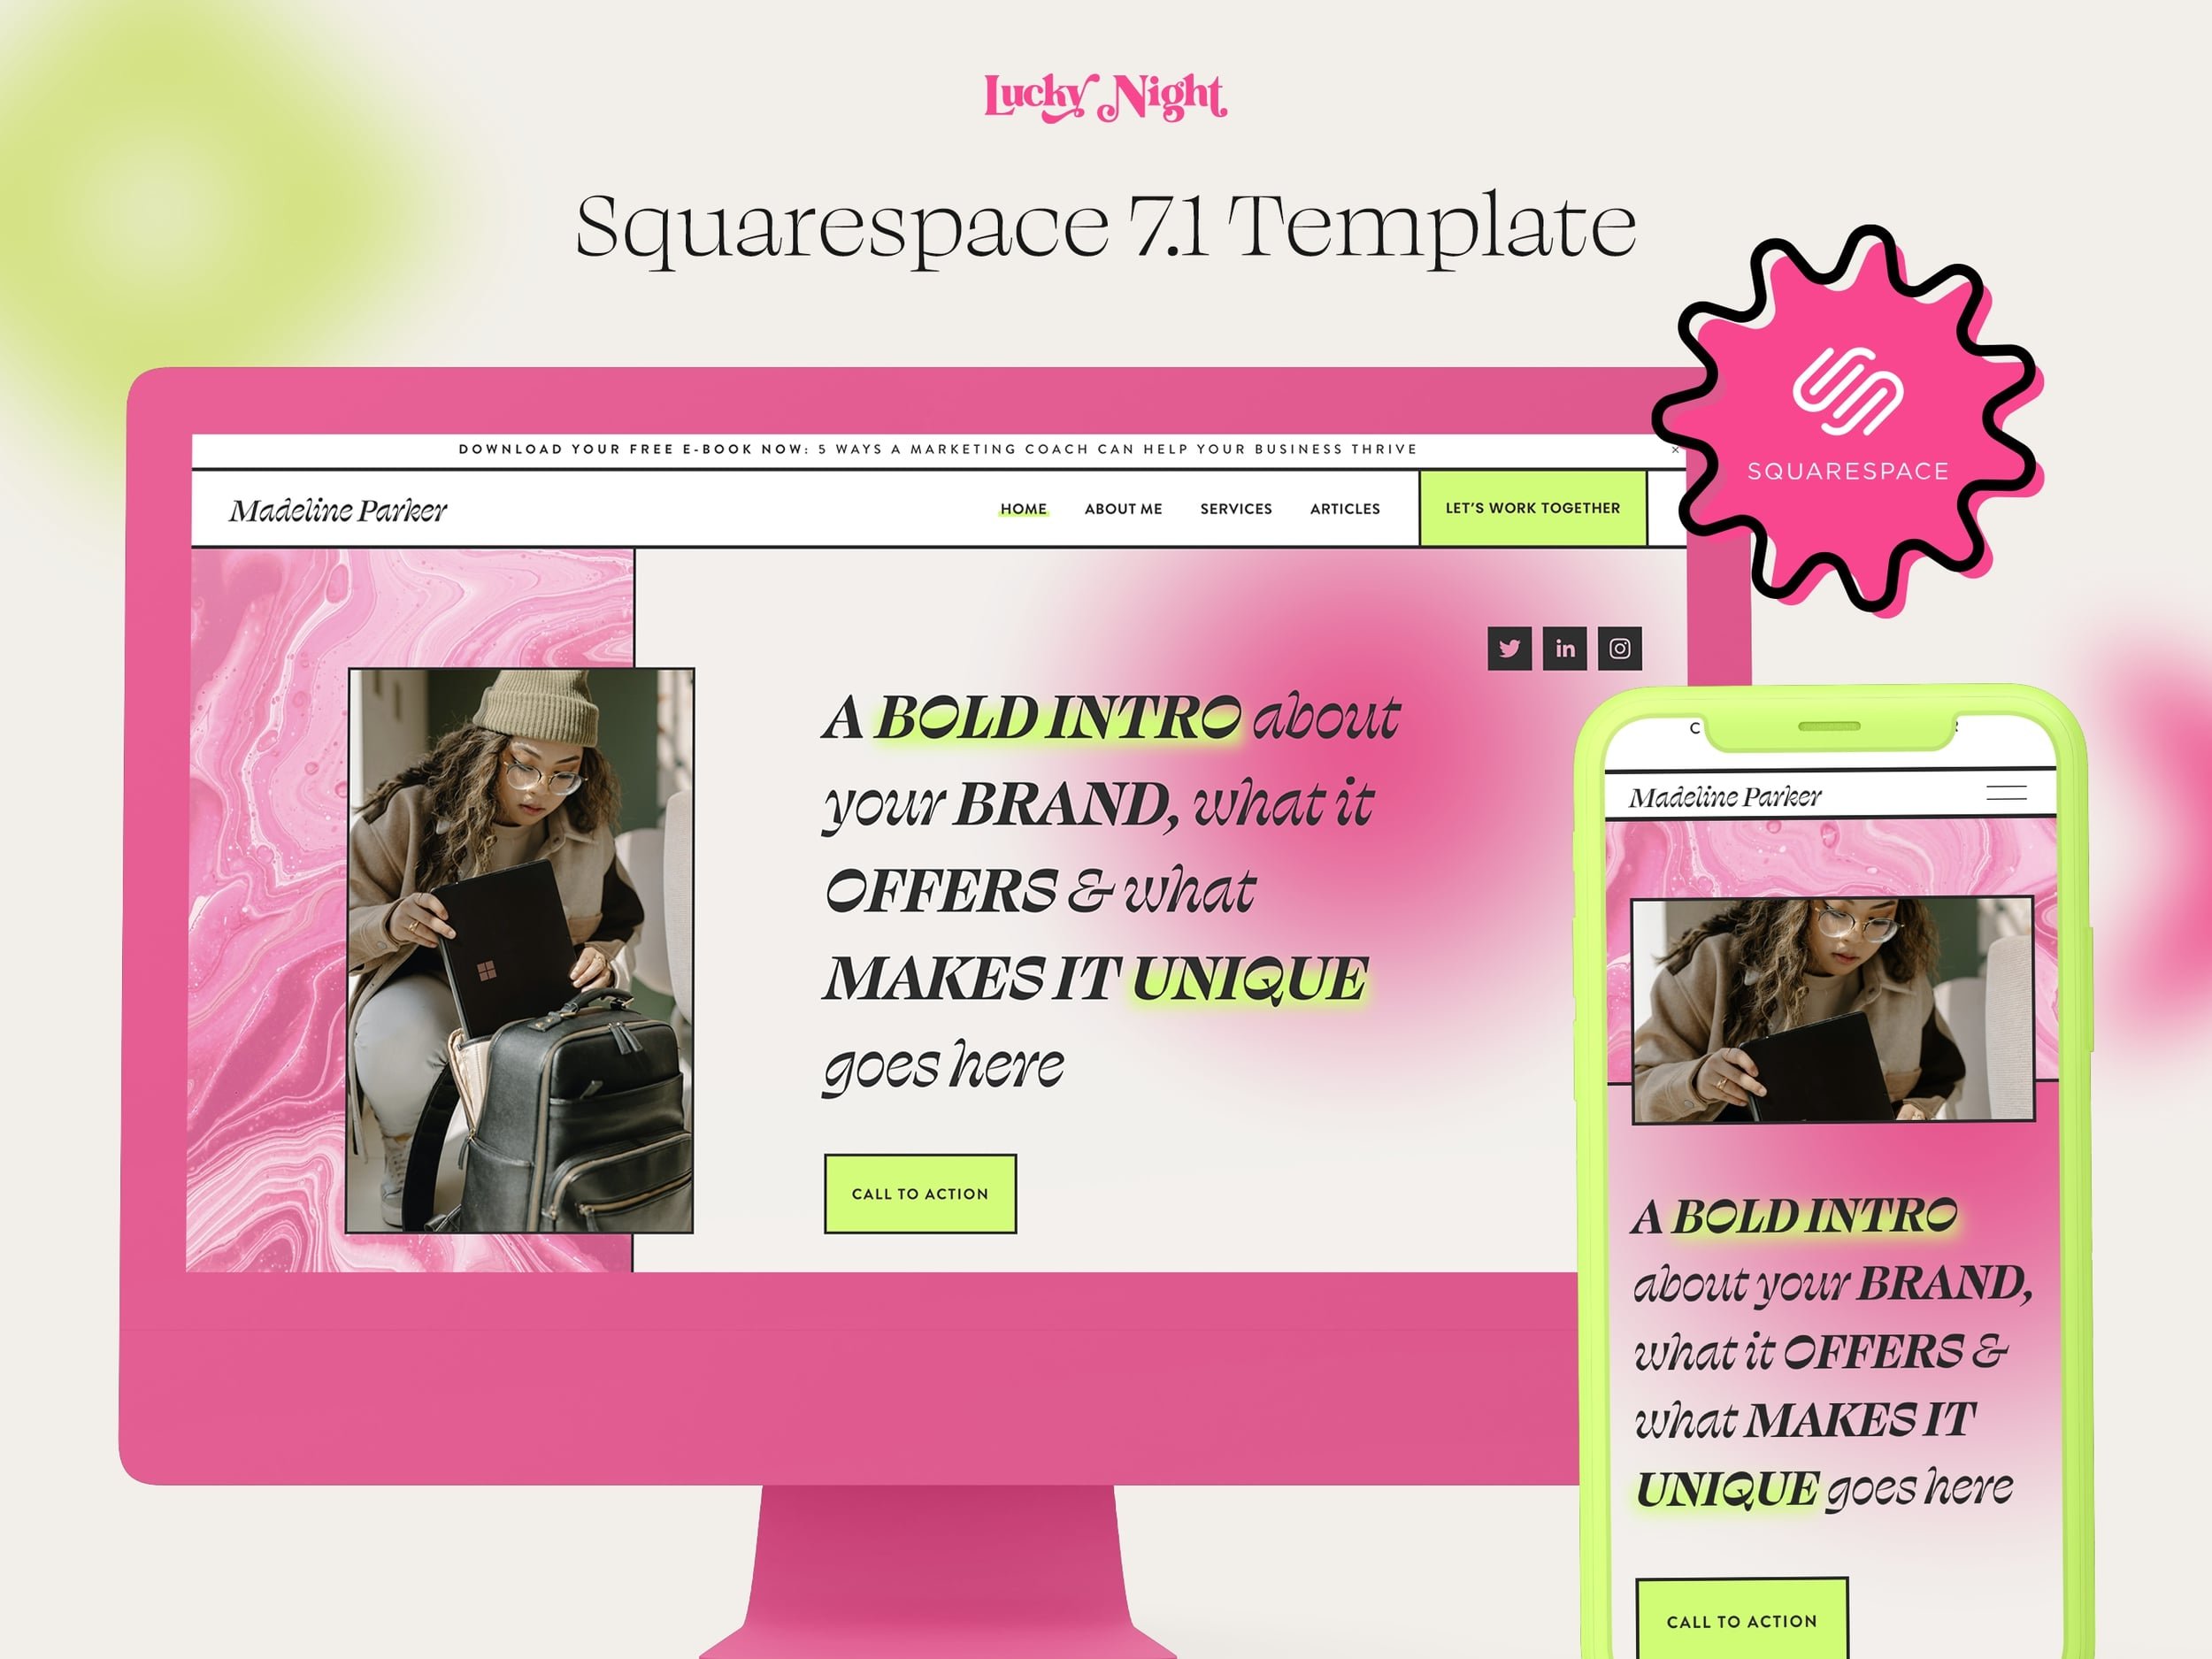 Modern & bright Squarespace 7.1 website template for coaches & consultants 1.jpg